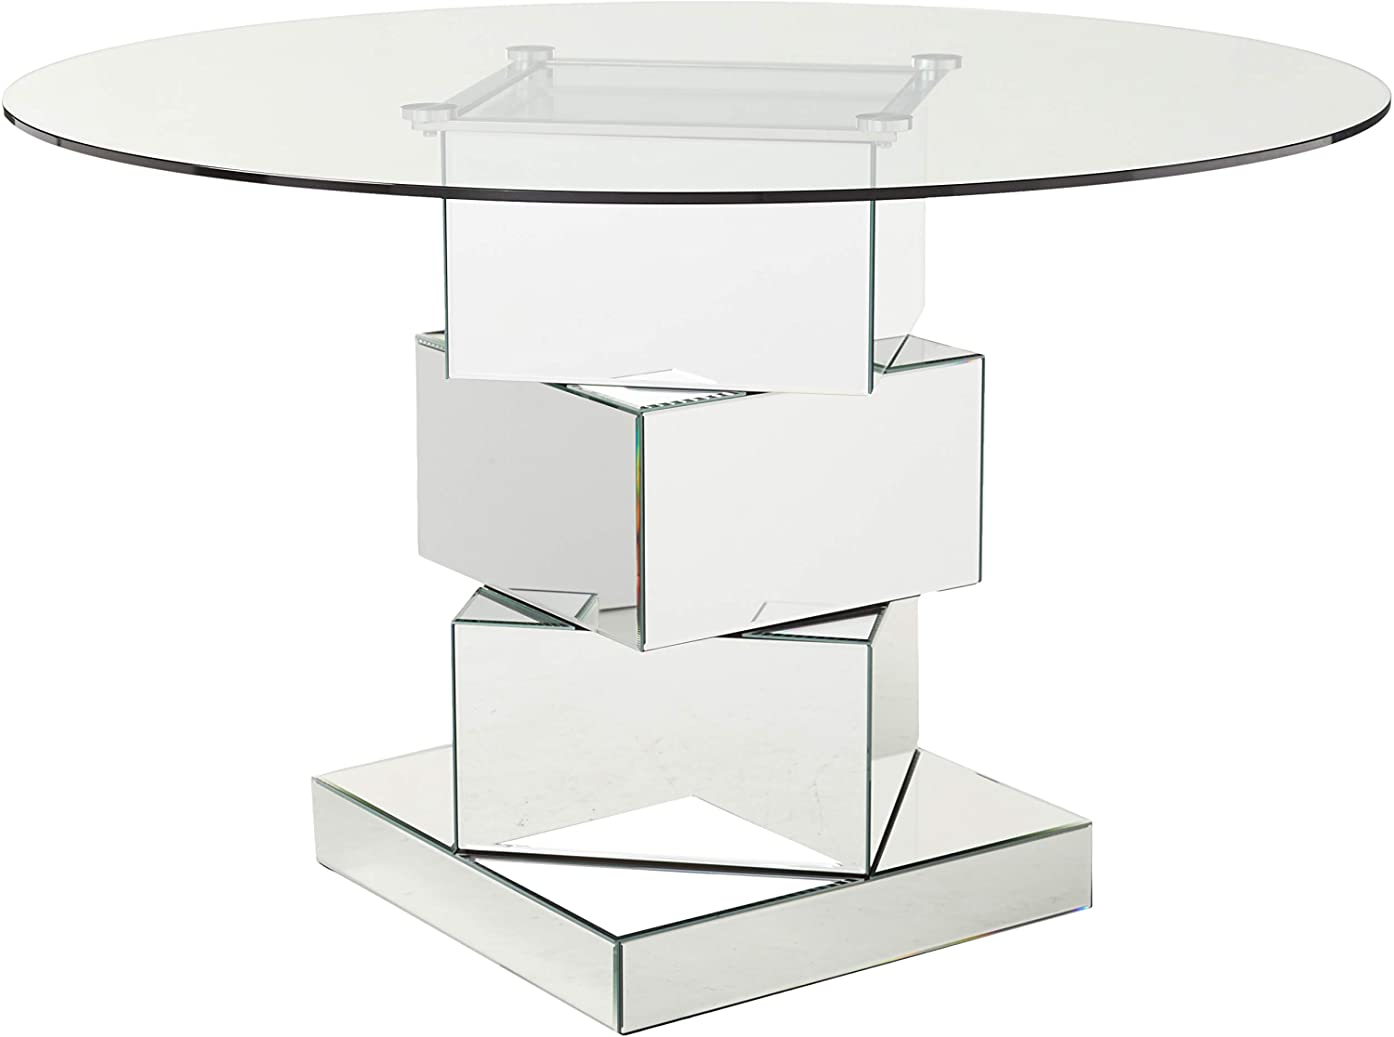 B07GTC3YG7 Meridian Furniture Haven Collection Modern Contemporary Mirrored Dining Table with Round Tempred Glass Top, 50" W x 50" D x 31.5" H